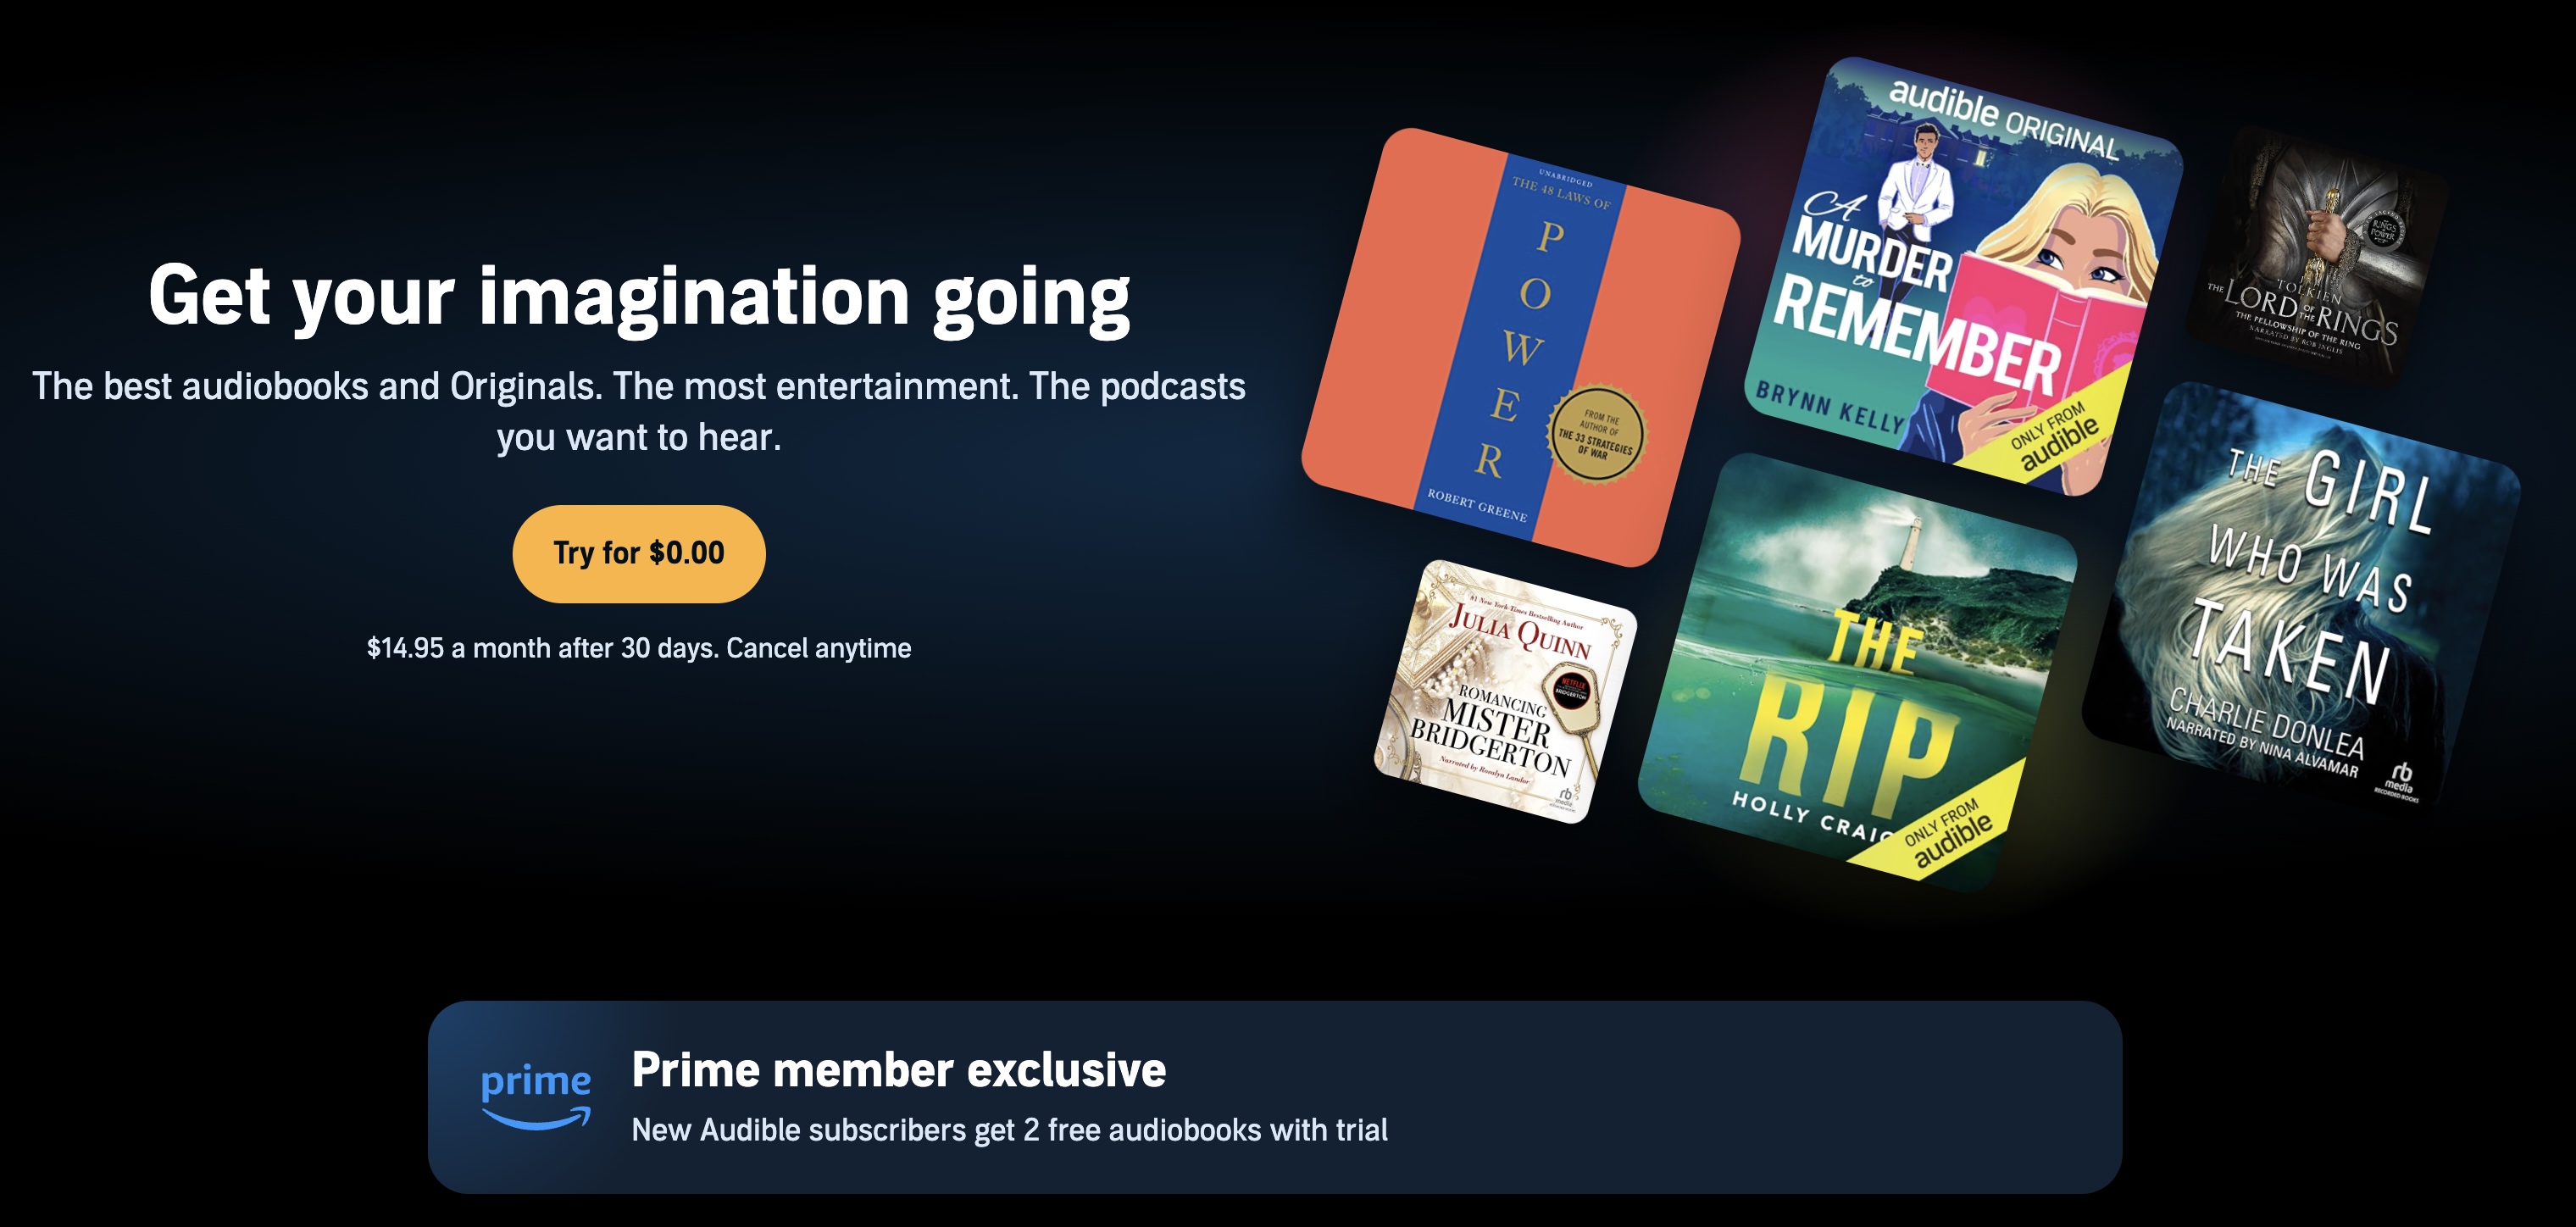 Prime member exclusive New Audible subscribers get 2 free audiobooks with trial